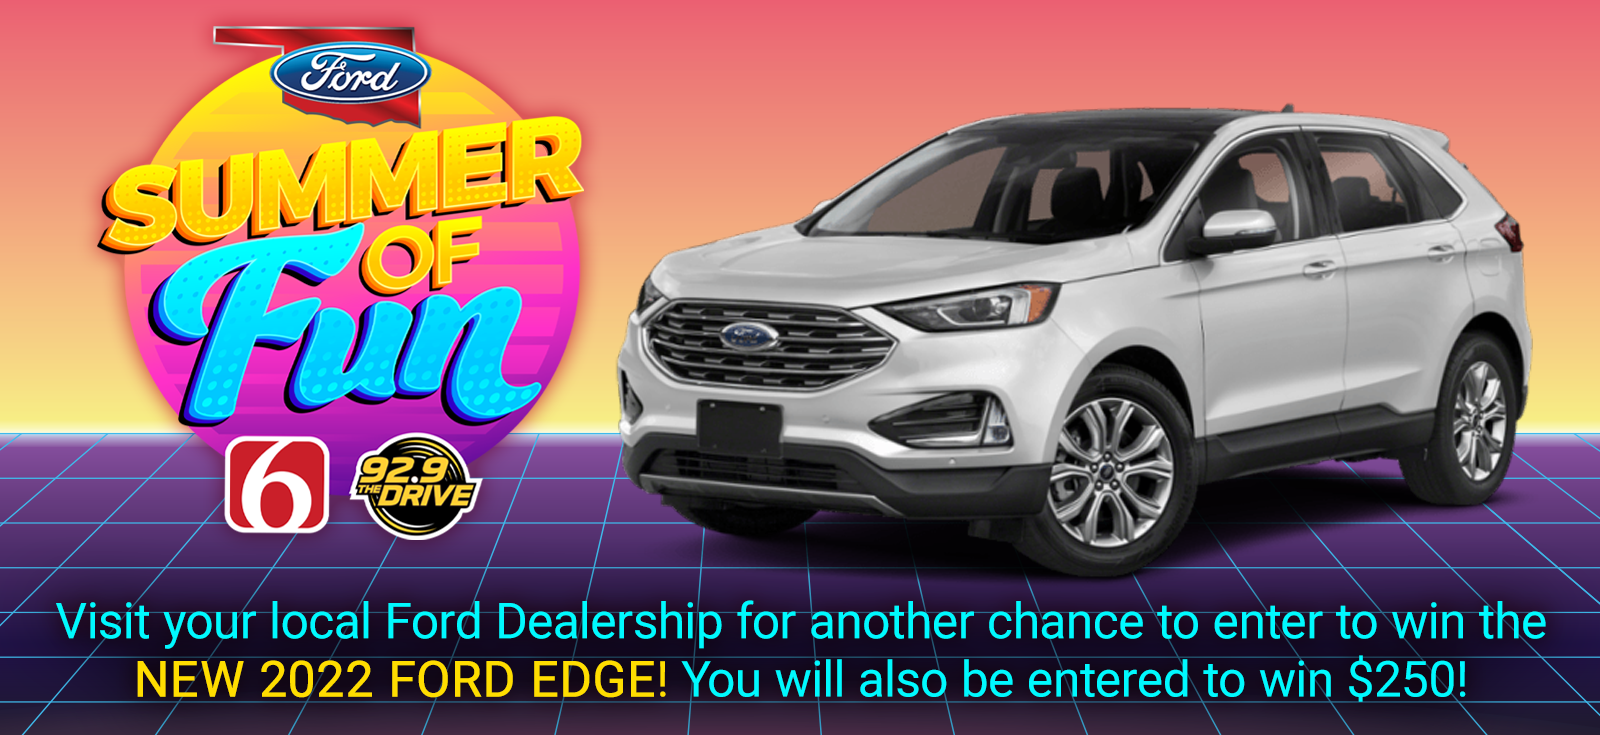 Win a NEW 2022 Ford Edge from 92.9 The Drive